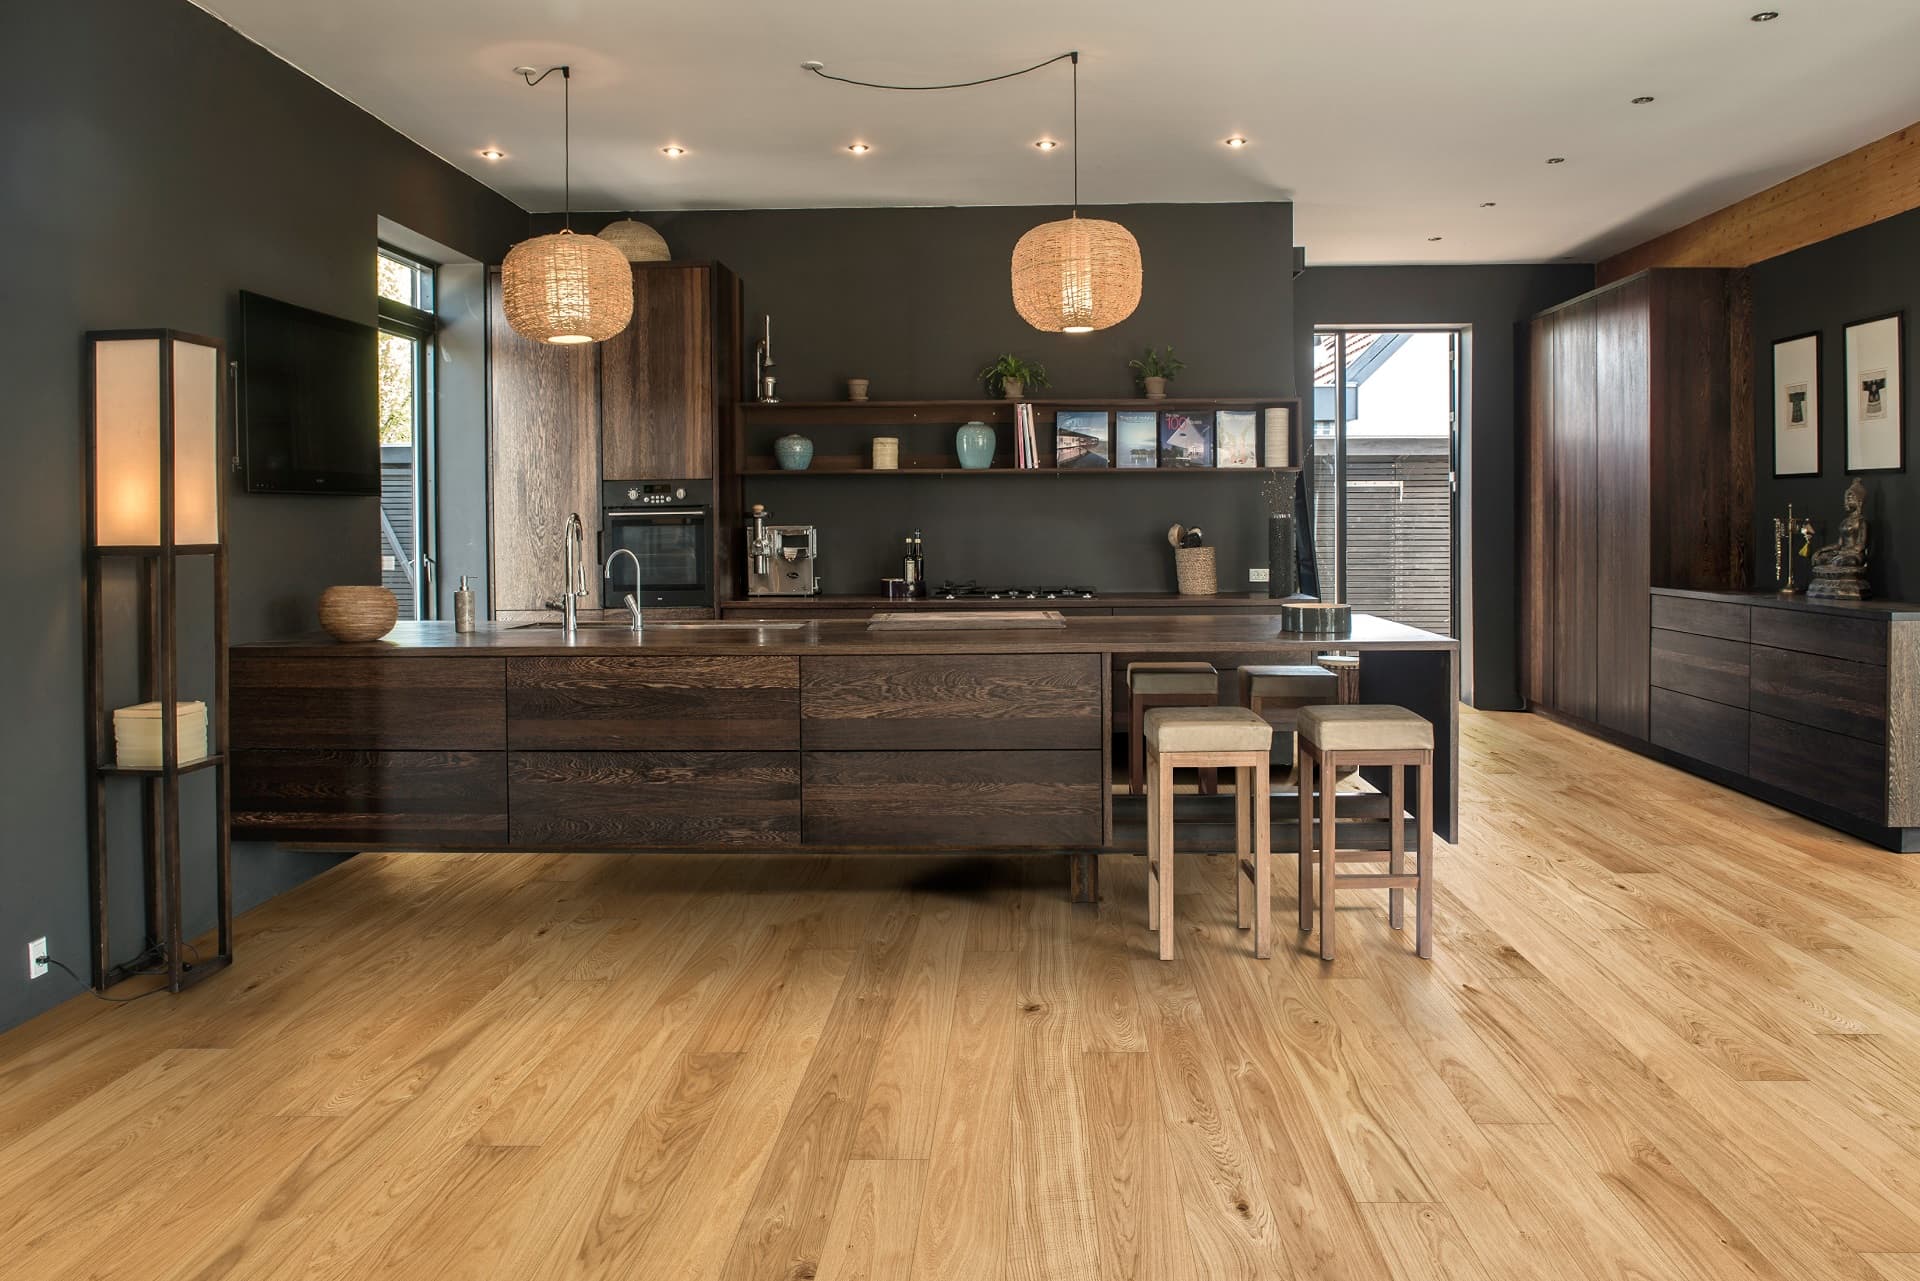 18 Hits|Photos Timber flooring suppliers nz for Dining Room